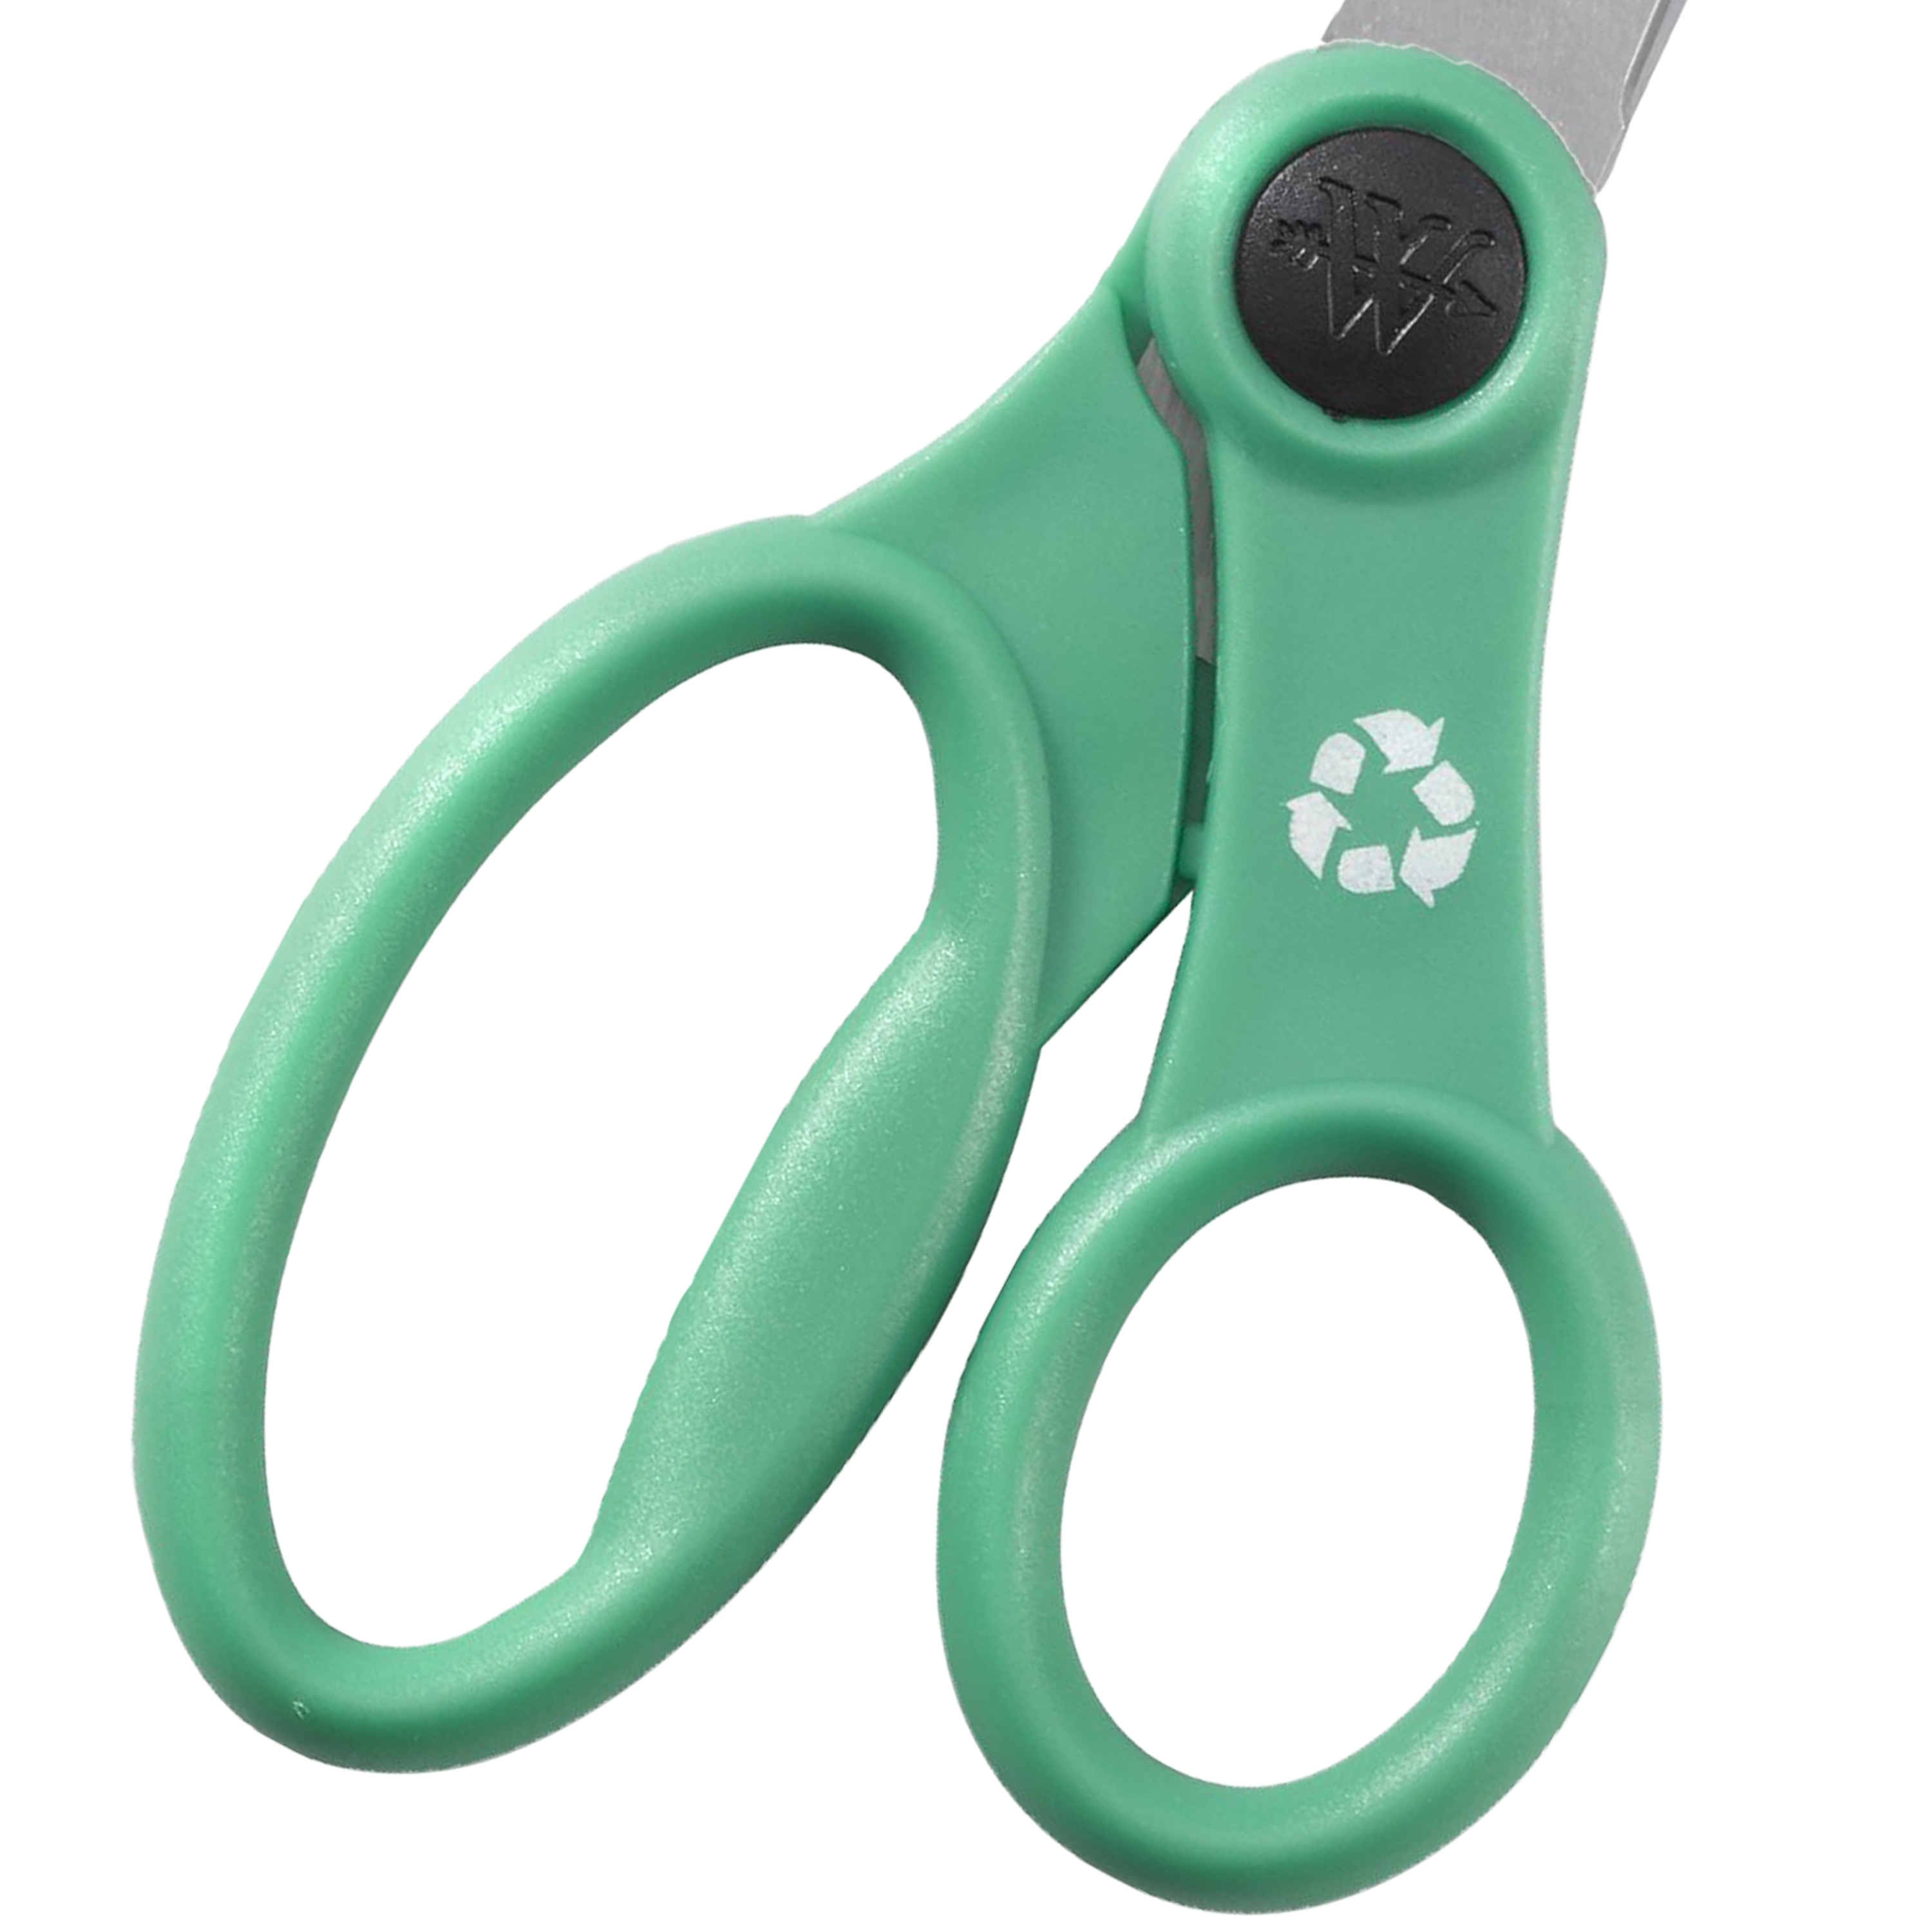 Westcott Kleenearth Recycled Scissors, 8", Straight, Anti-Microbial, Stainless Steel, for Office, Green, 1-Count - image 4 of 8